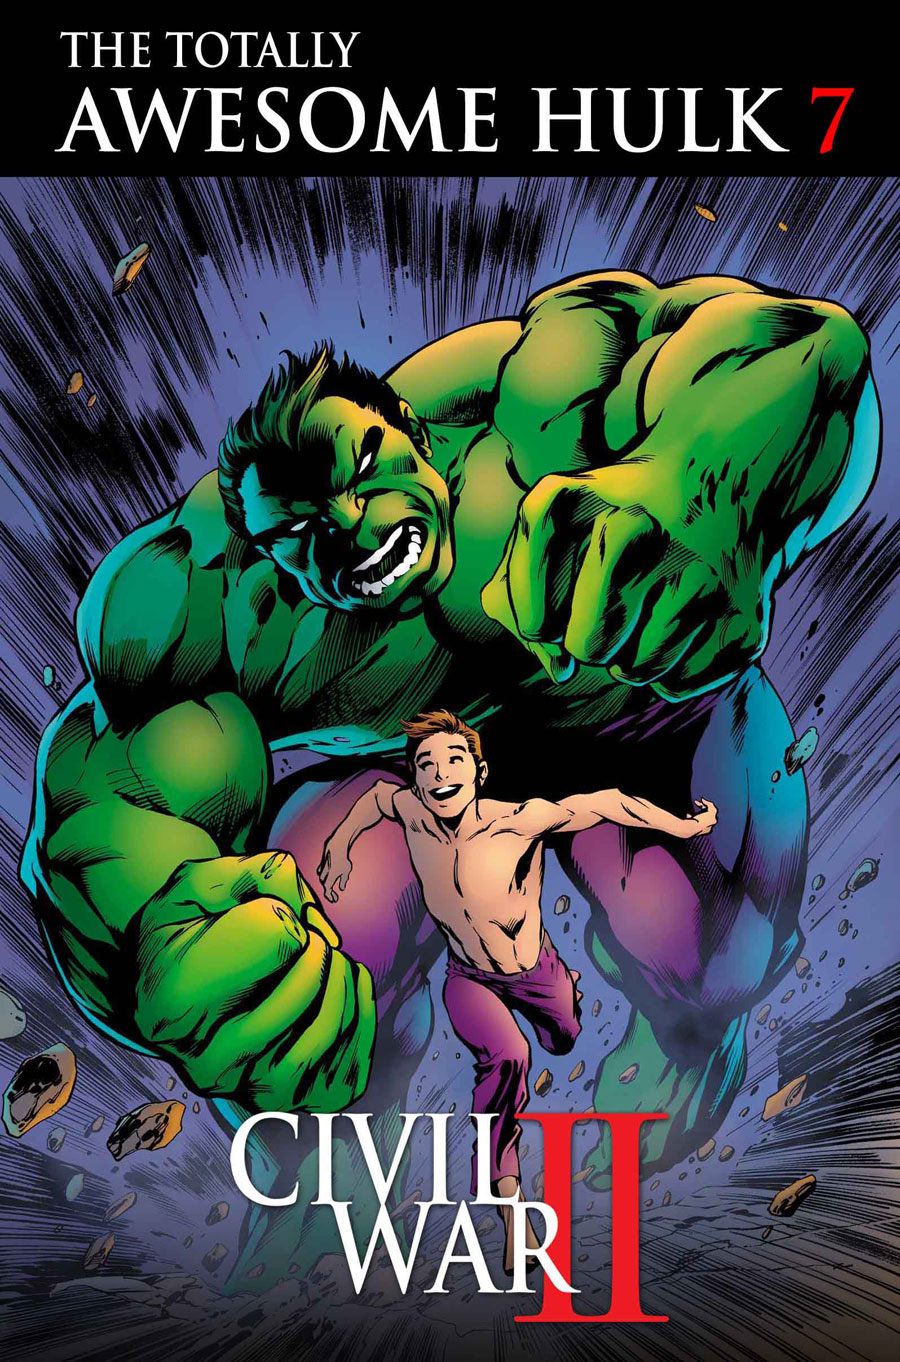 The Totally Awesome Hulk